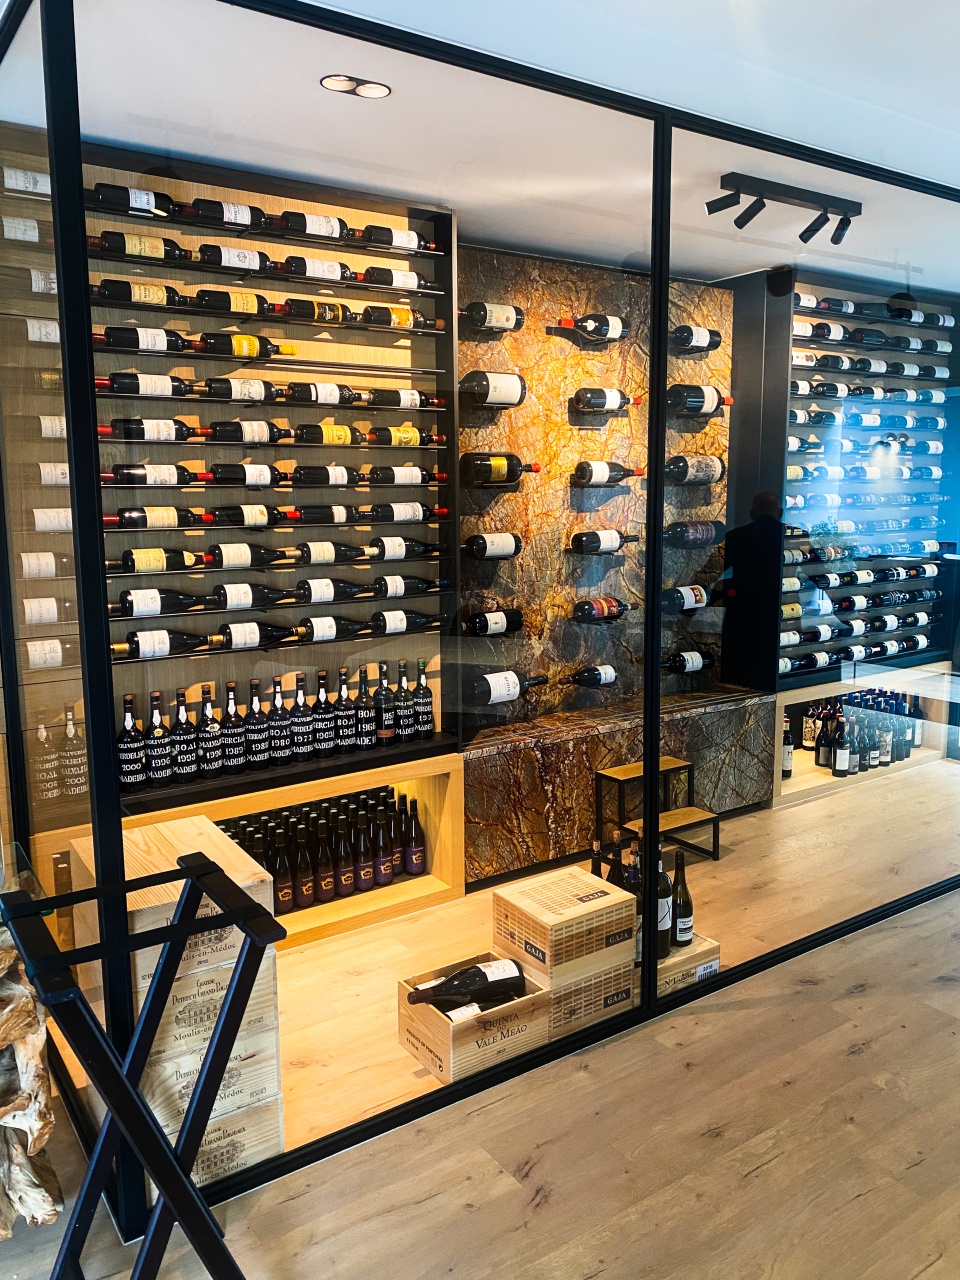 An impressive, well-lit wine storage cabinet in restaurant De Bakermat, filled with an extensive selection of high-quality wines, acting as an elegant eye-catcher in the sleek, modern interior.